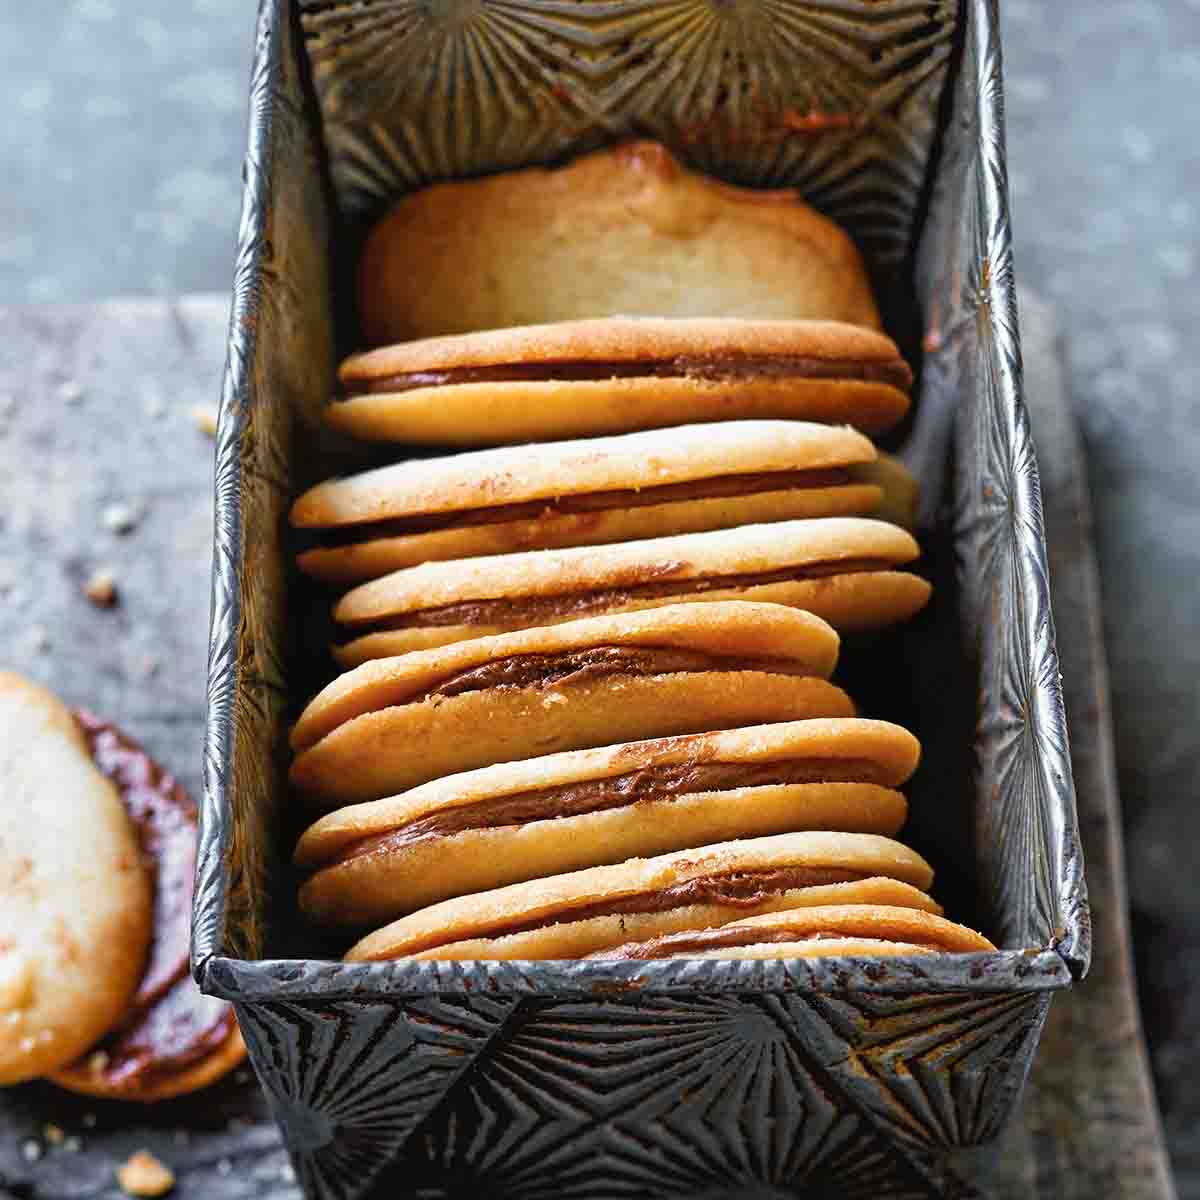 Eight homemade Milano cookies in a metal loaf tin.